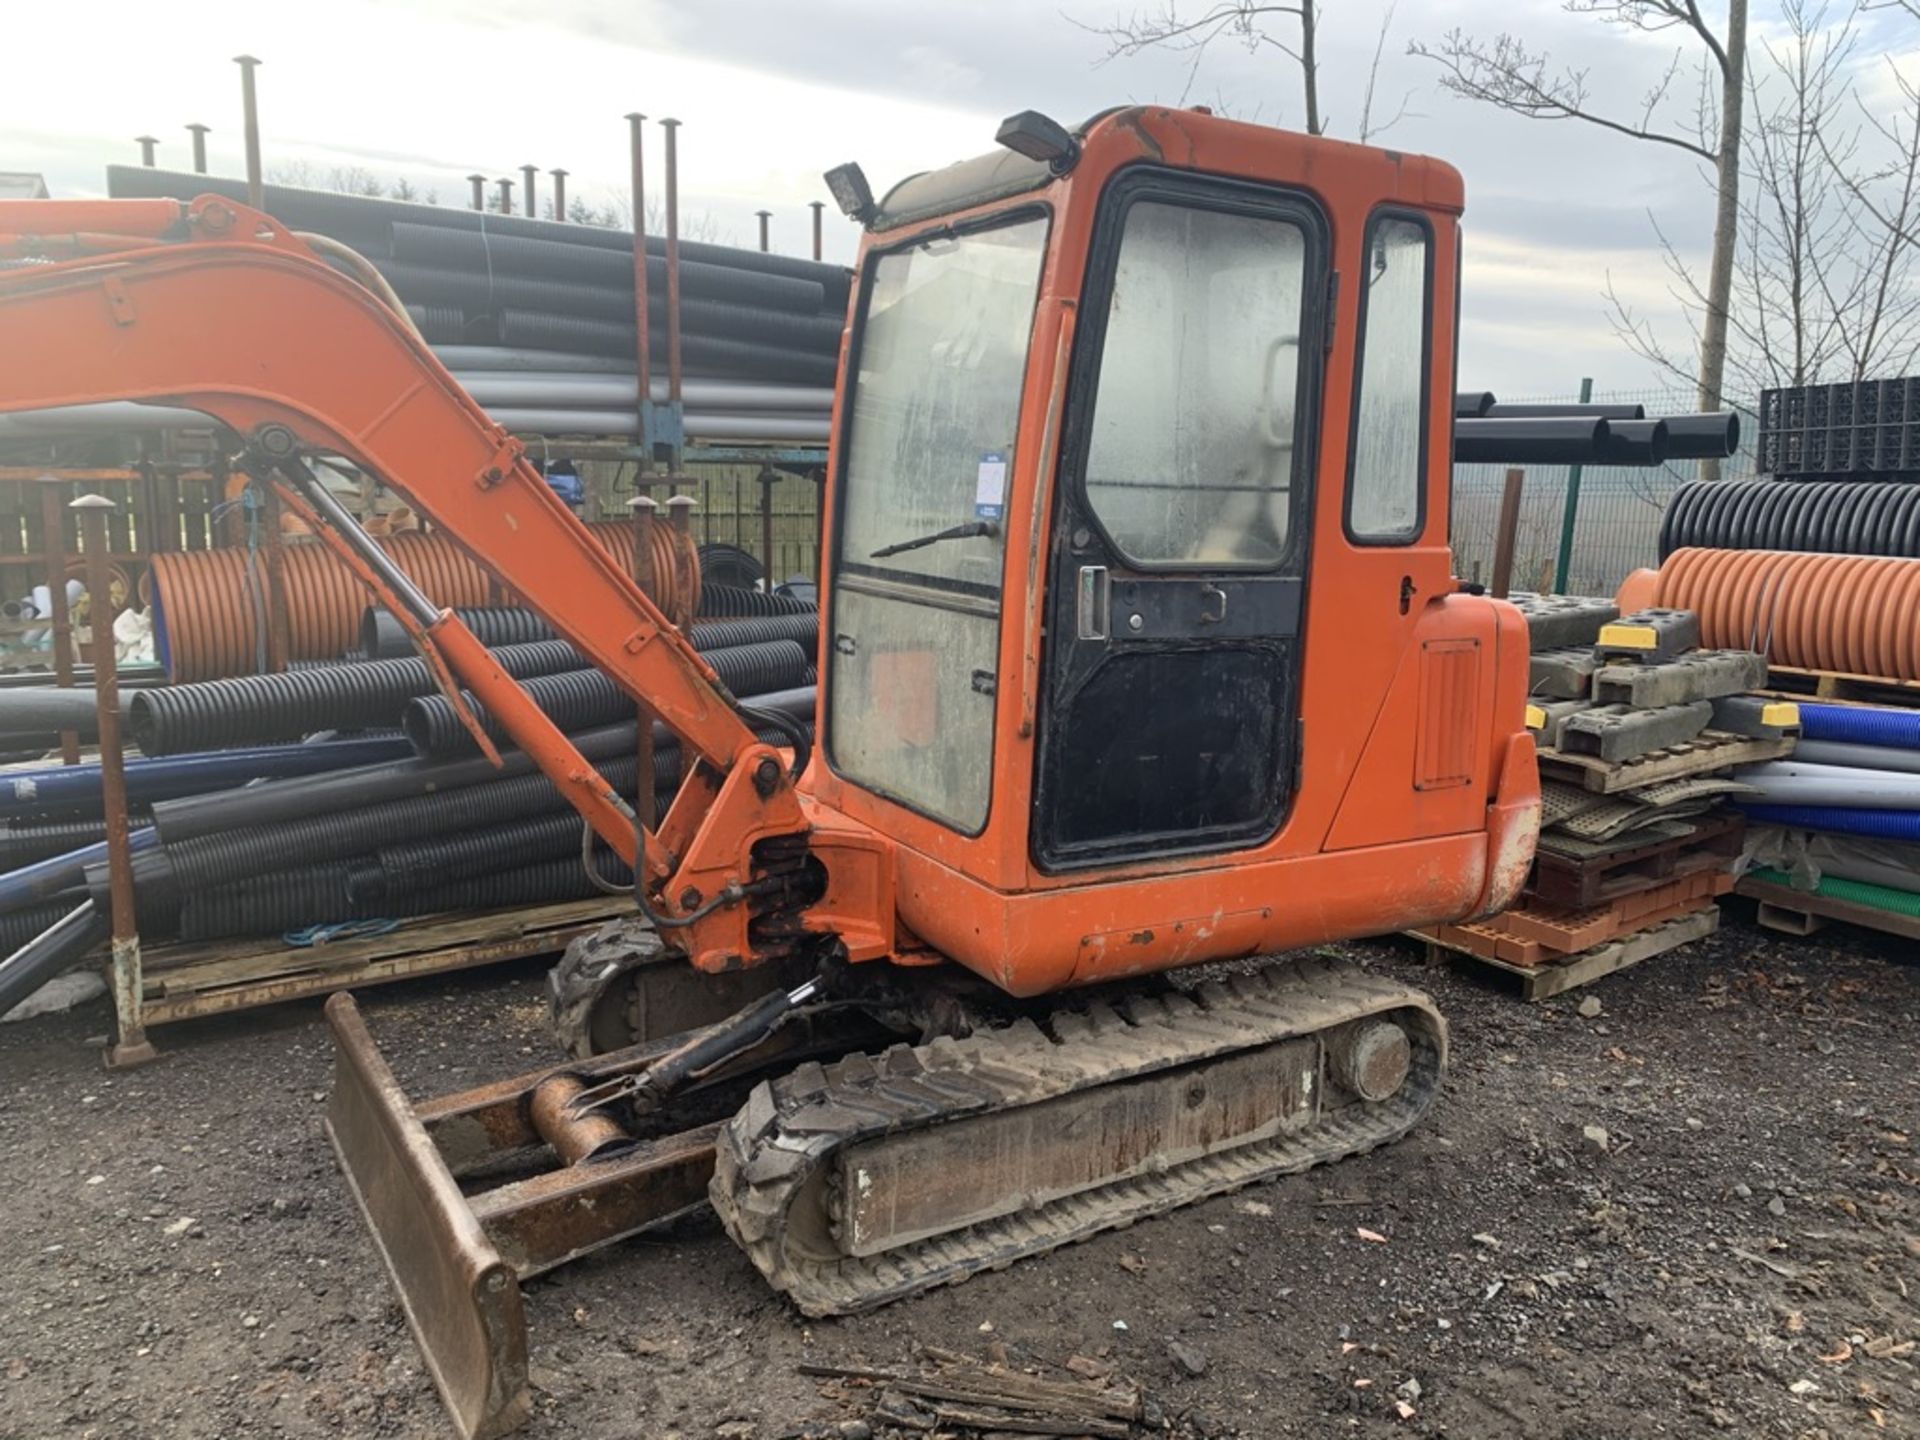 Daewoo, 030 3 Ton Excavator Date of Manufacture: 2002 rubber tracks 5x Buckets Ref: JEX10 - Image 2 of 4